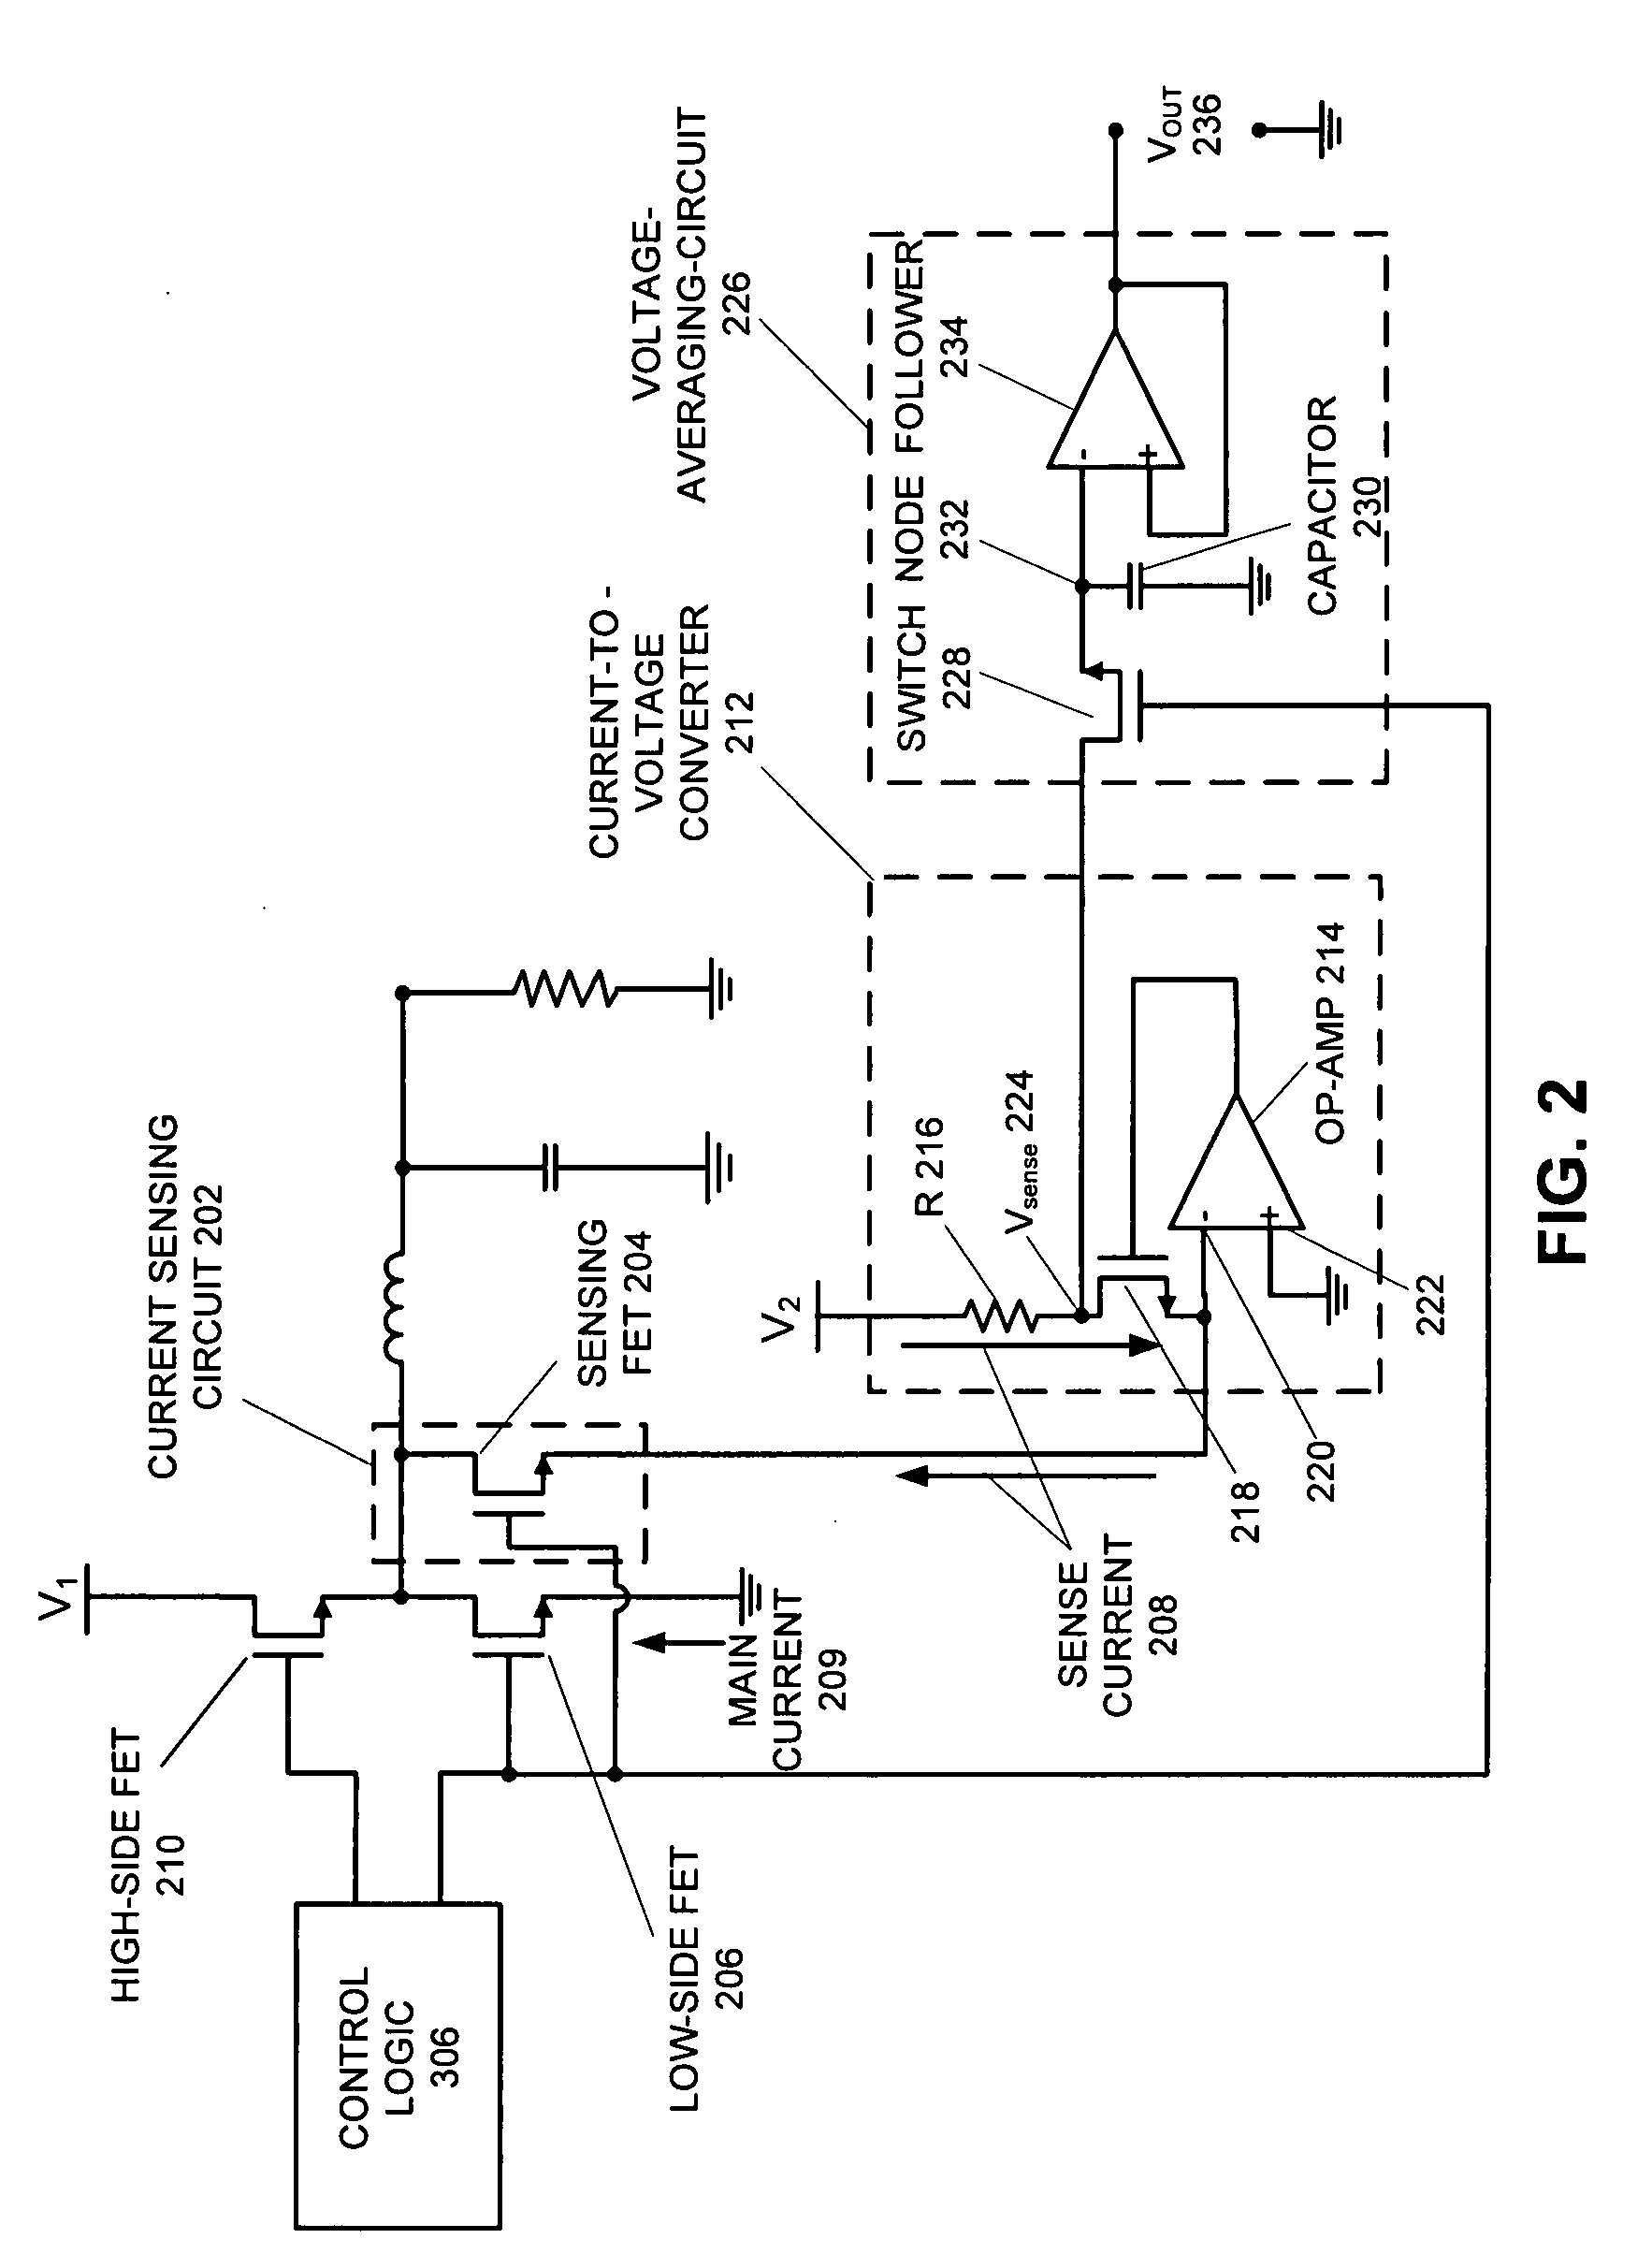 Method and apparatus for measuring the output current of a switching regulator